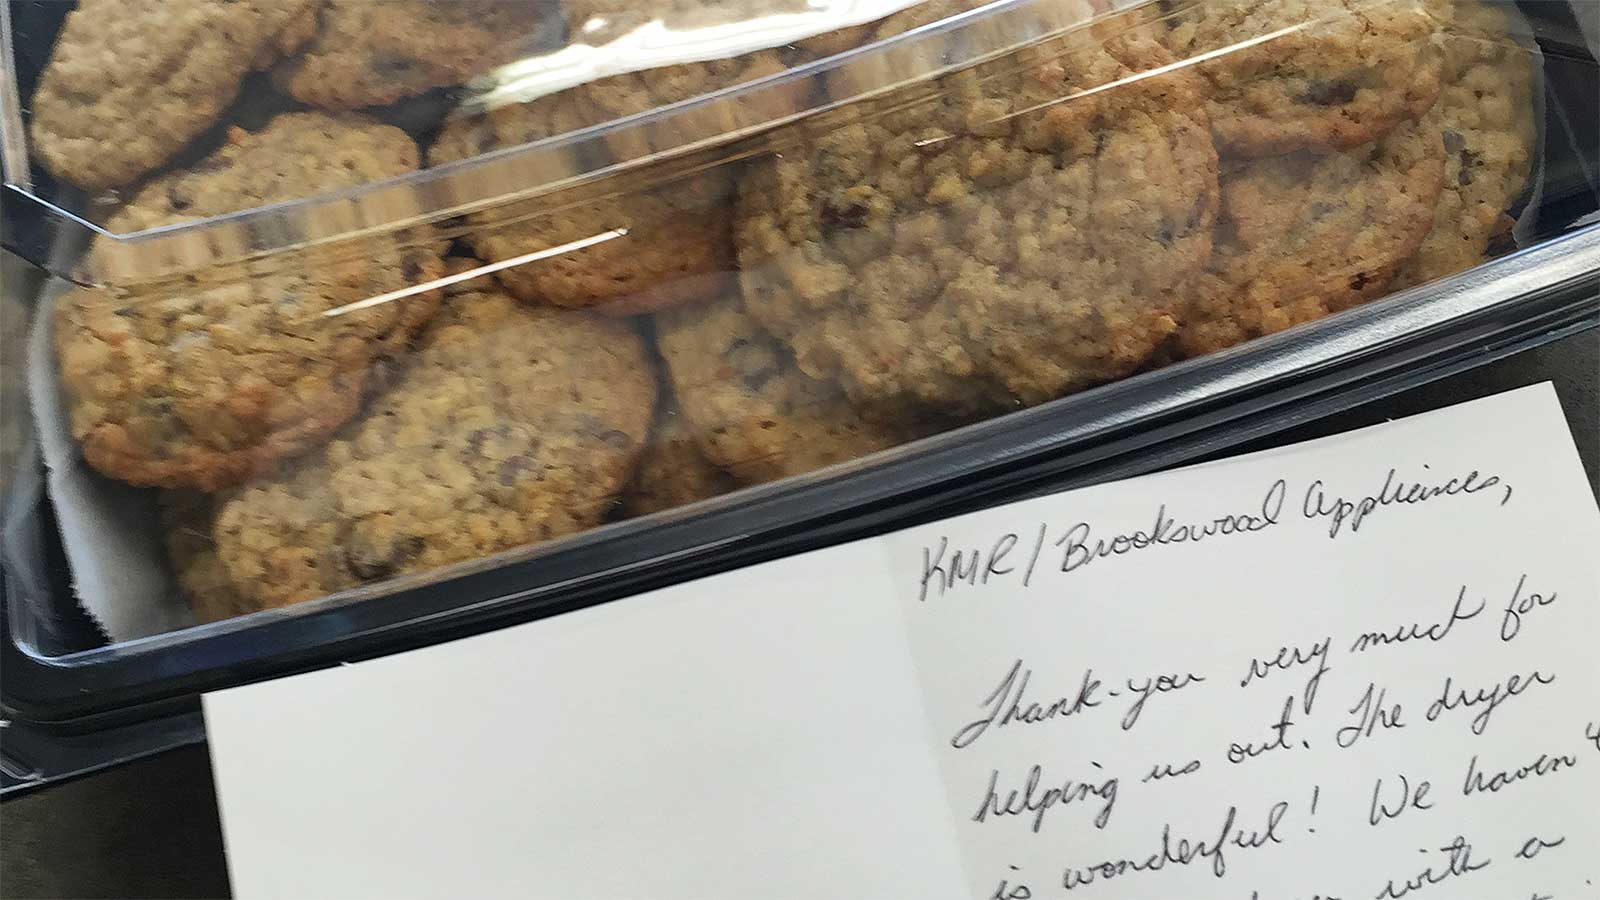 Thank-you cookies from one of our satisfied customers at Brookswood Appliance Service.